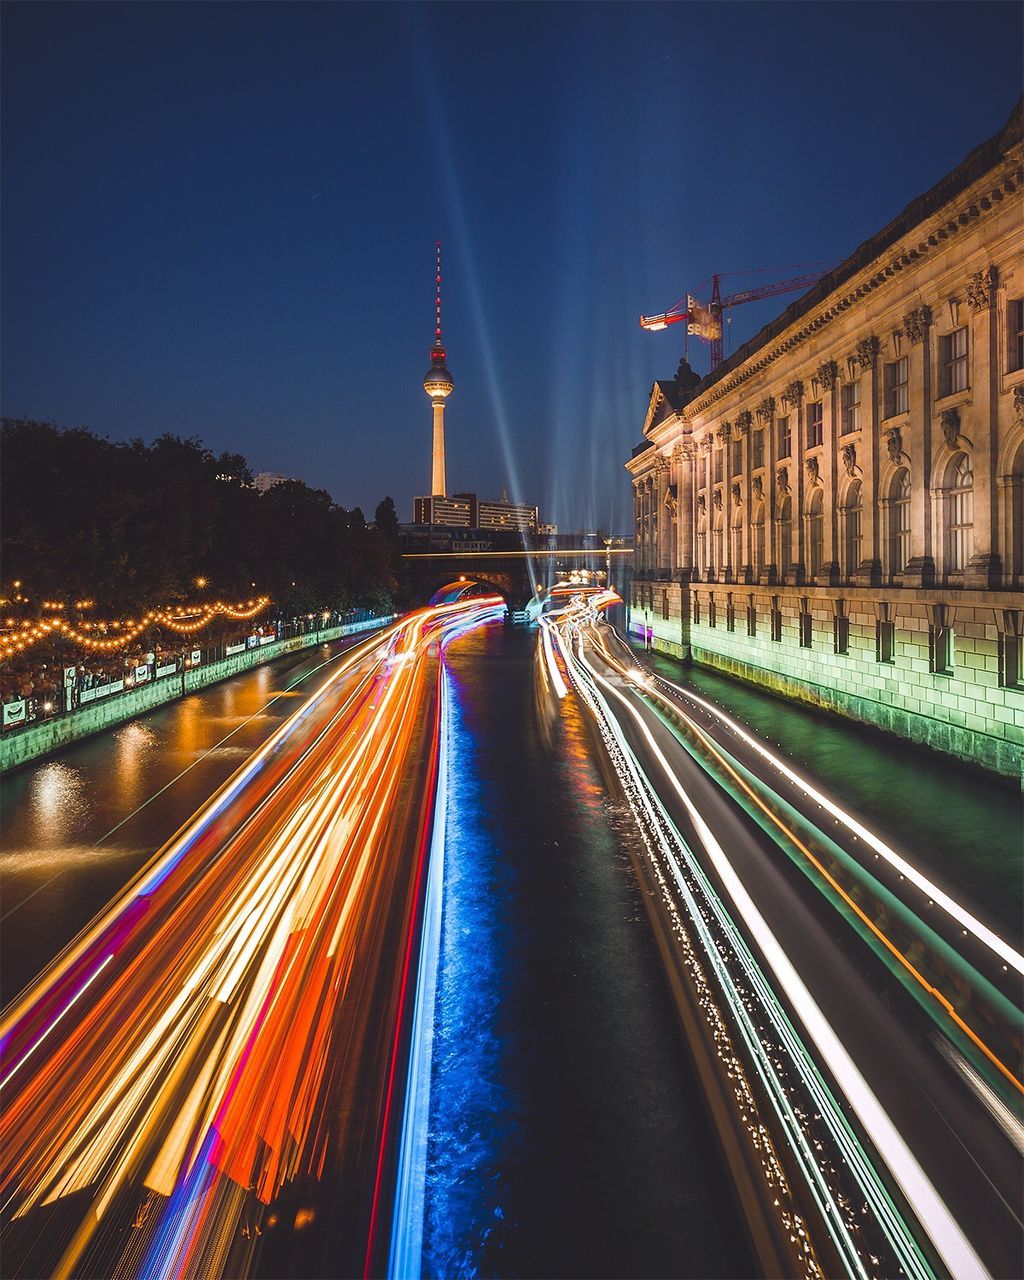 High angle view of light trails on street by bode museum against sky at night